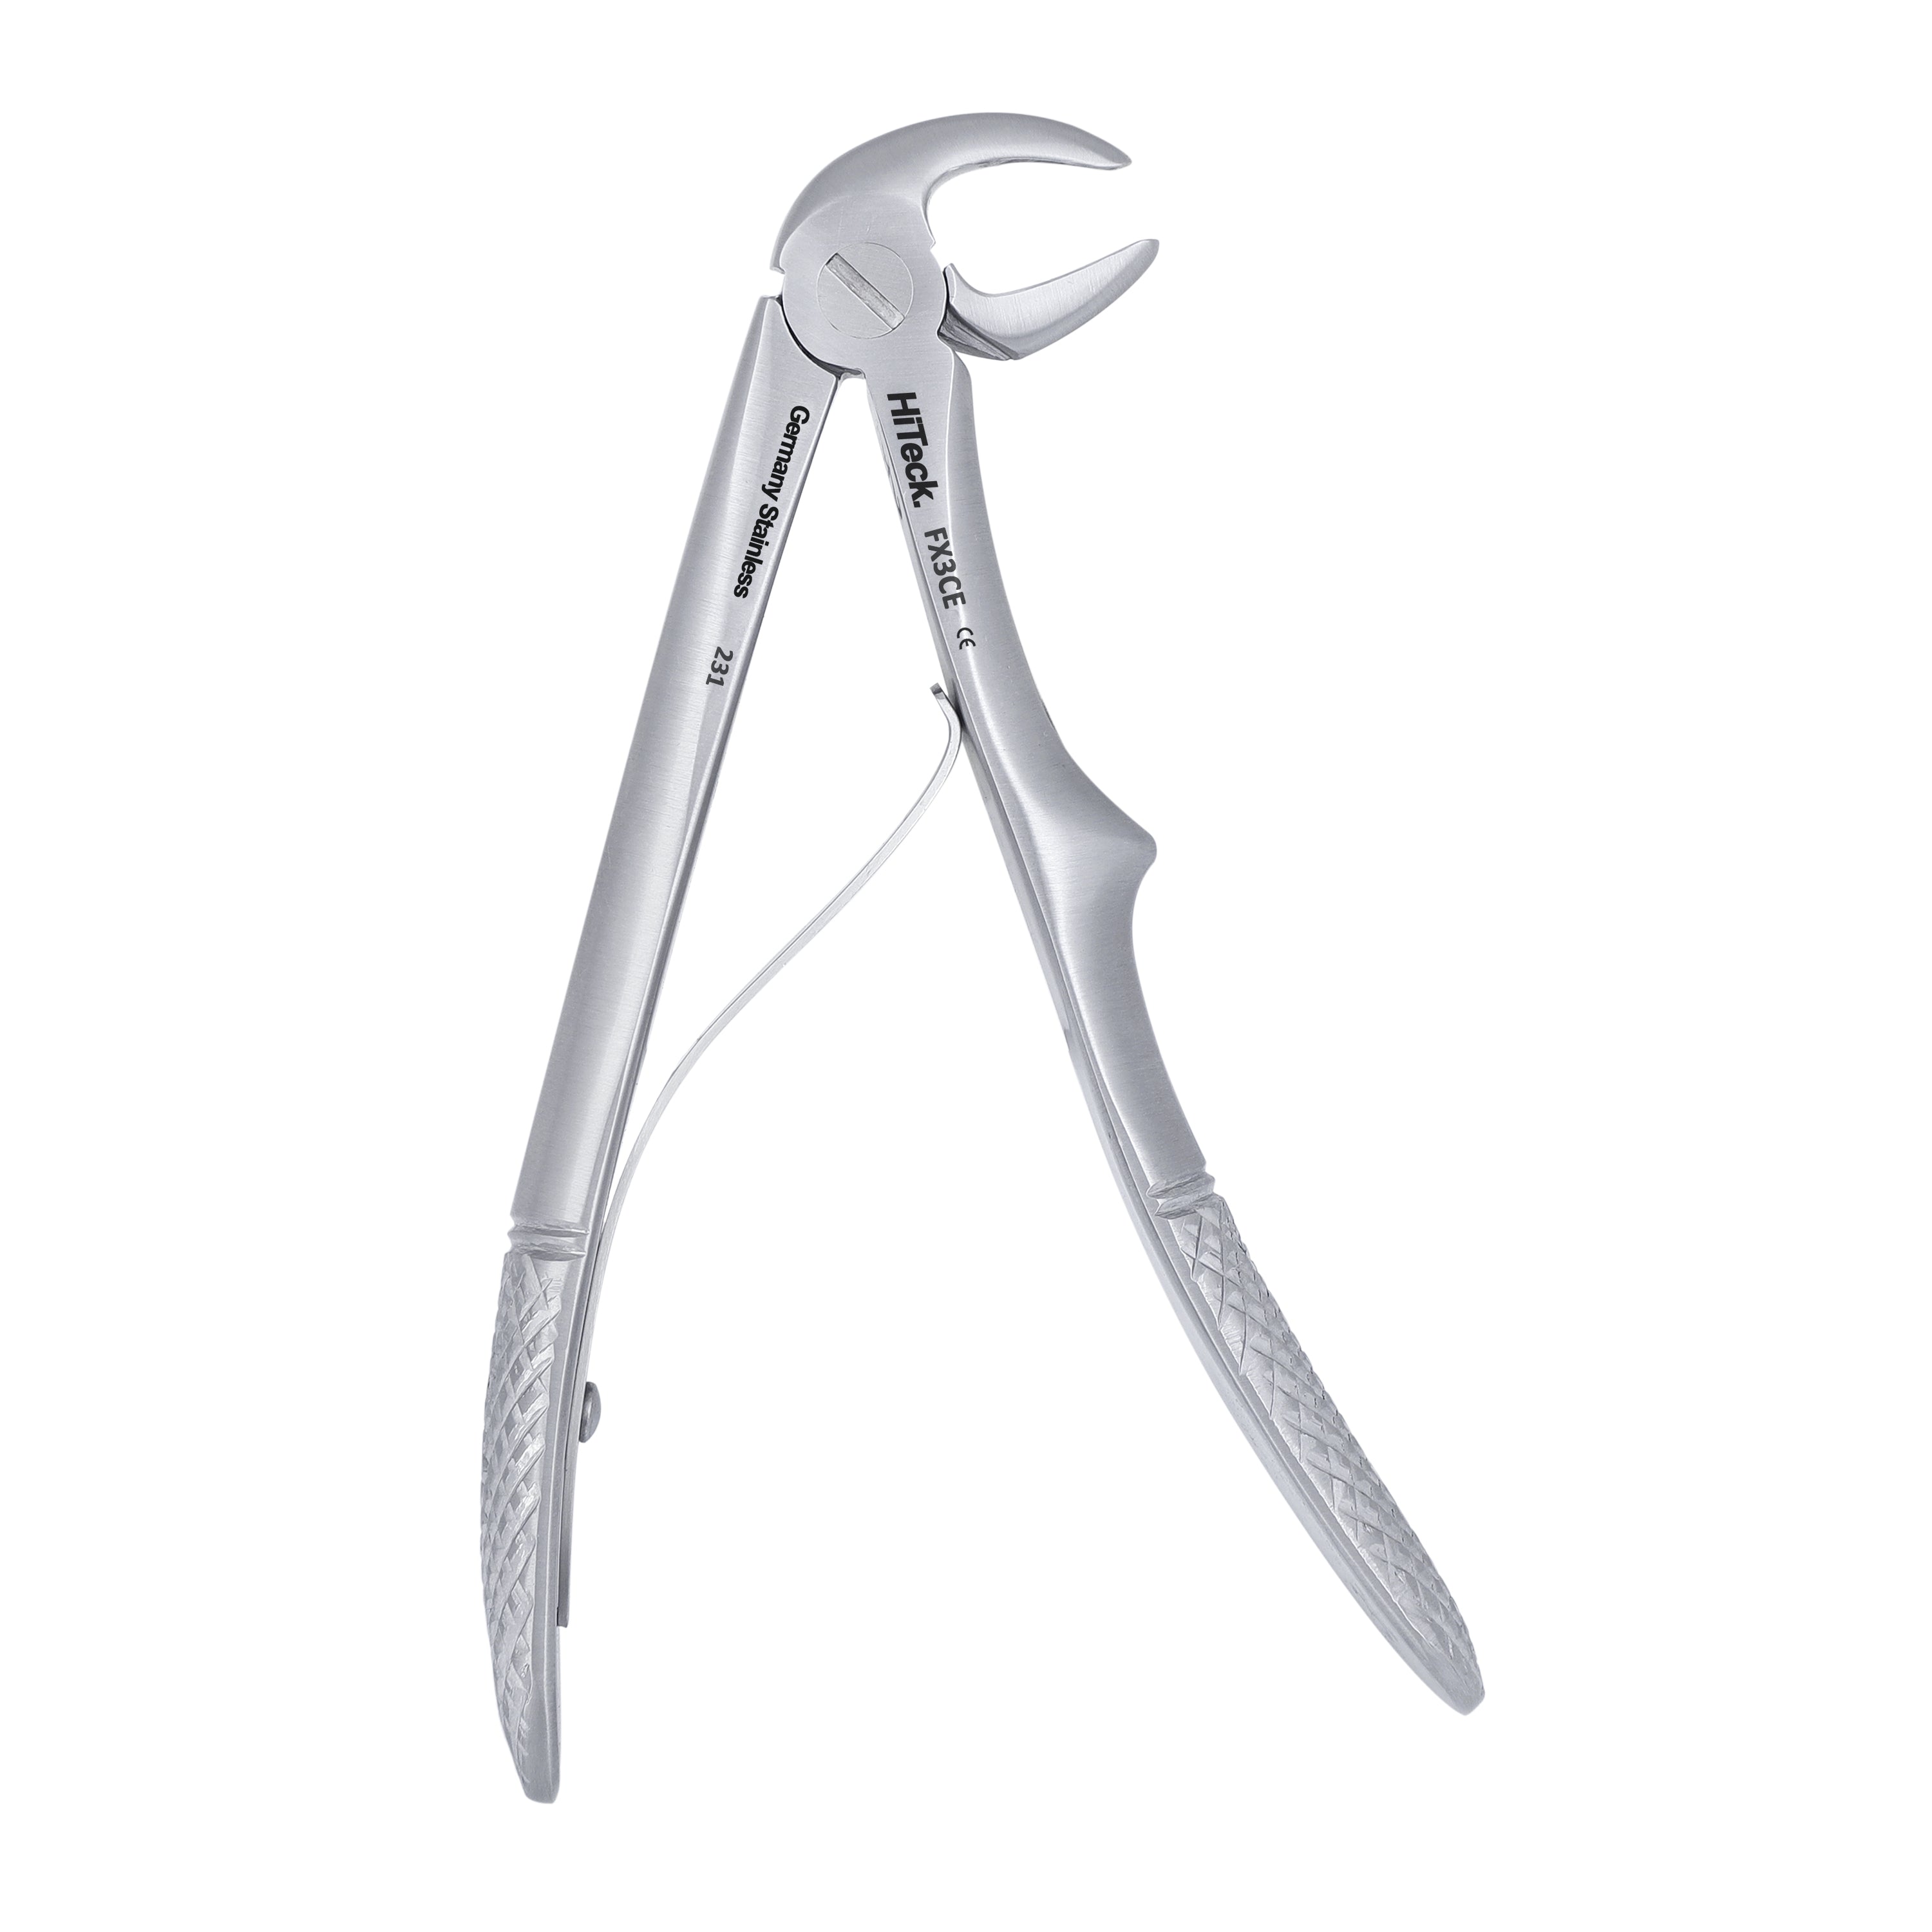 3C Pedo Lower Roots English Extraction Forcep - HiTeck Medical Instruments